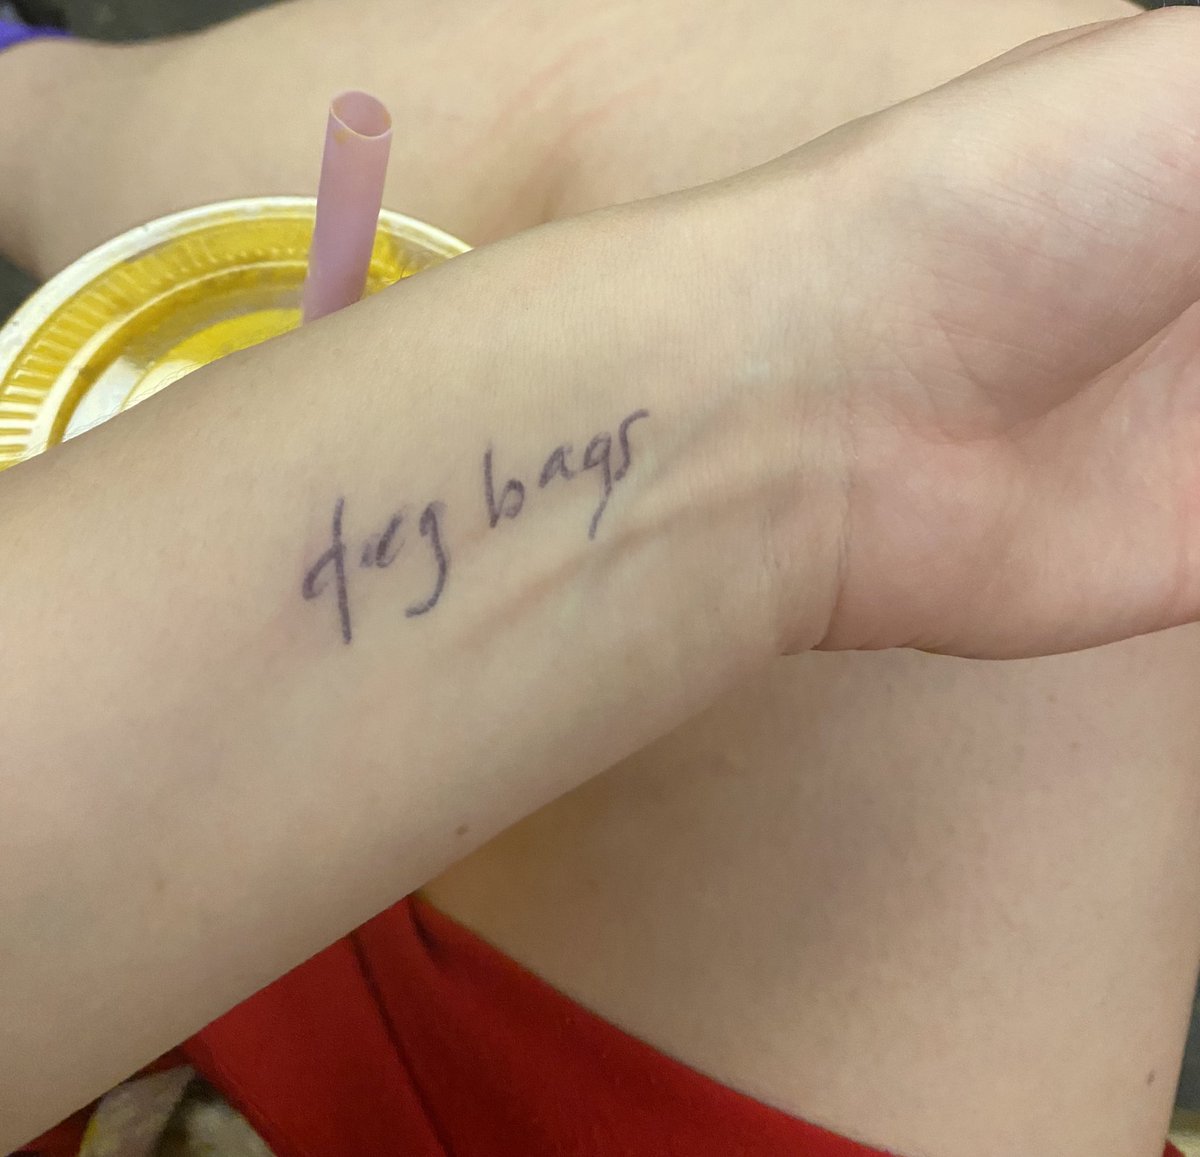 I wrote a reminder to pick up dog bags on my wrist and someone on the train just asked what my 'tattoo means.'💀